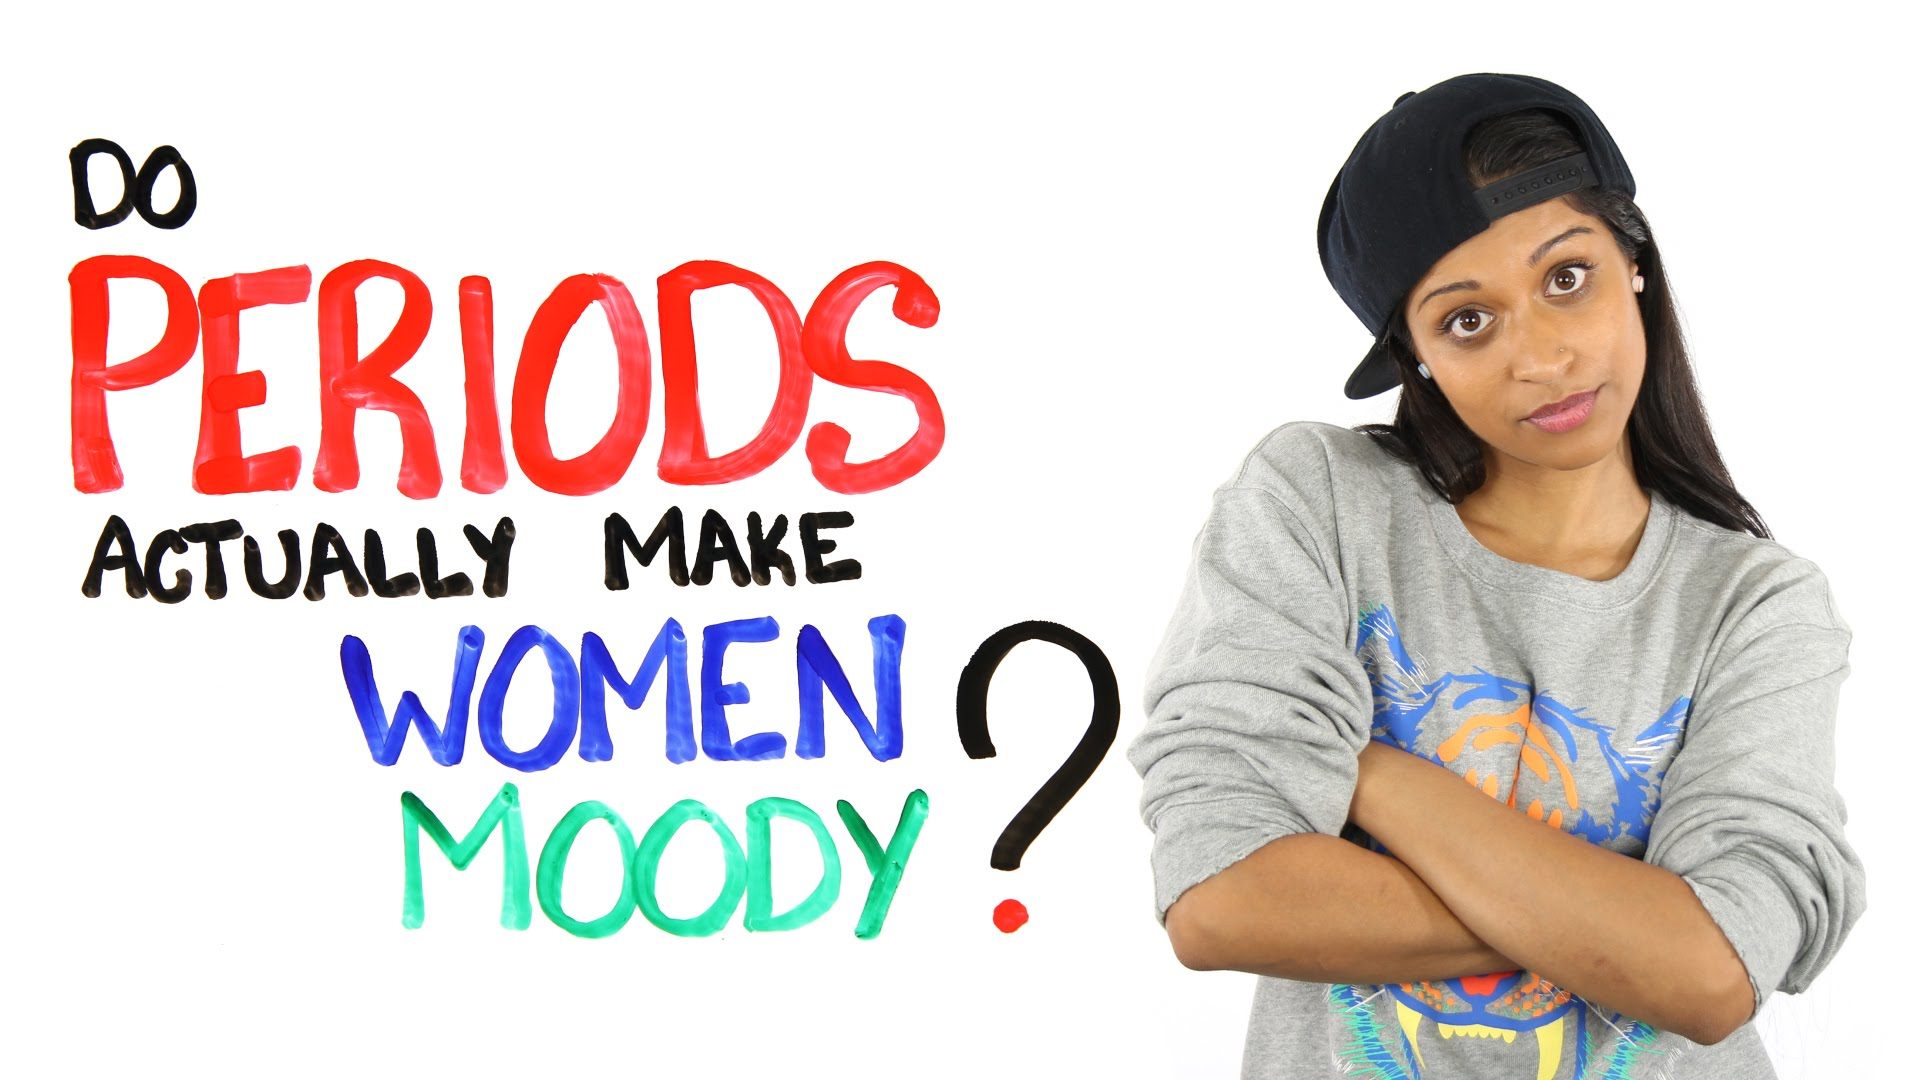 Common Myths About Menstruation, Busted!